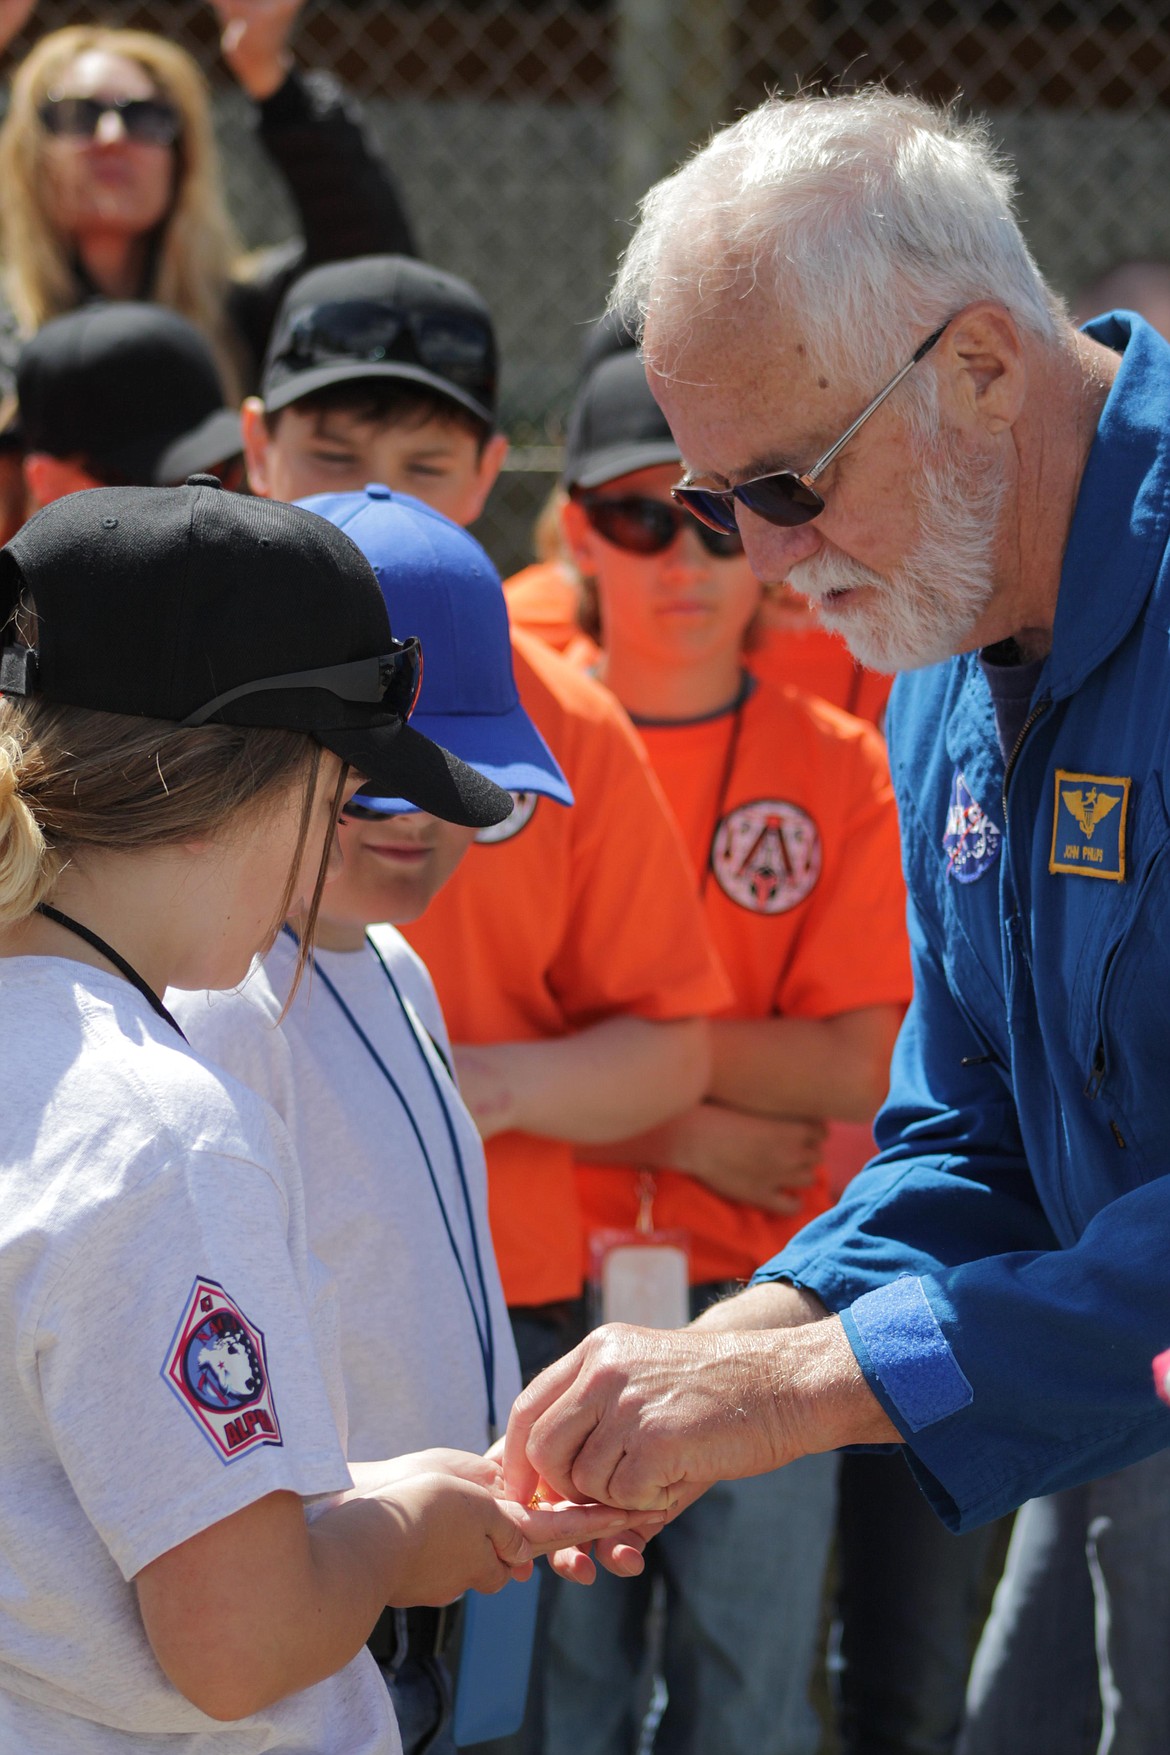 Retired astronaut John Phillips gives awards to students who participated in Space Day activities.